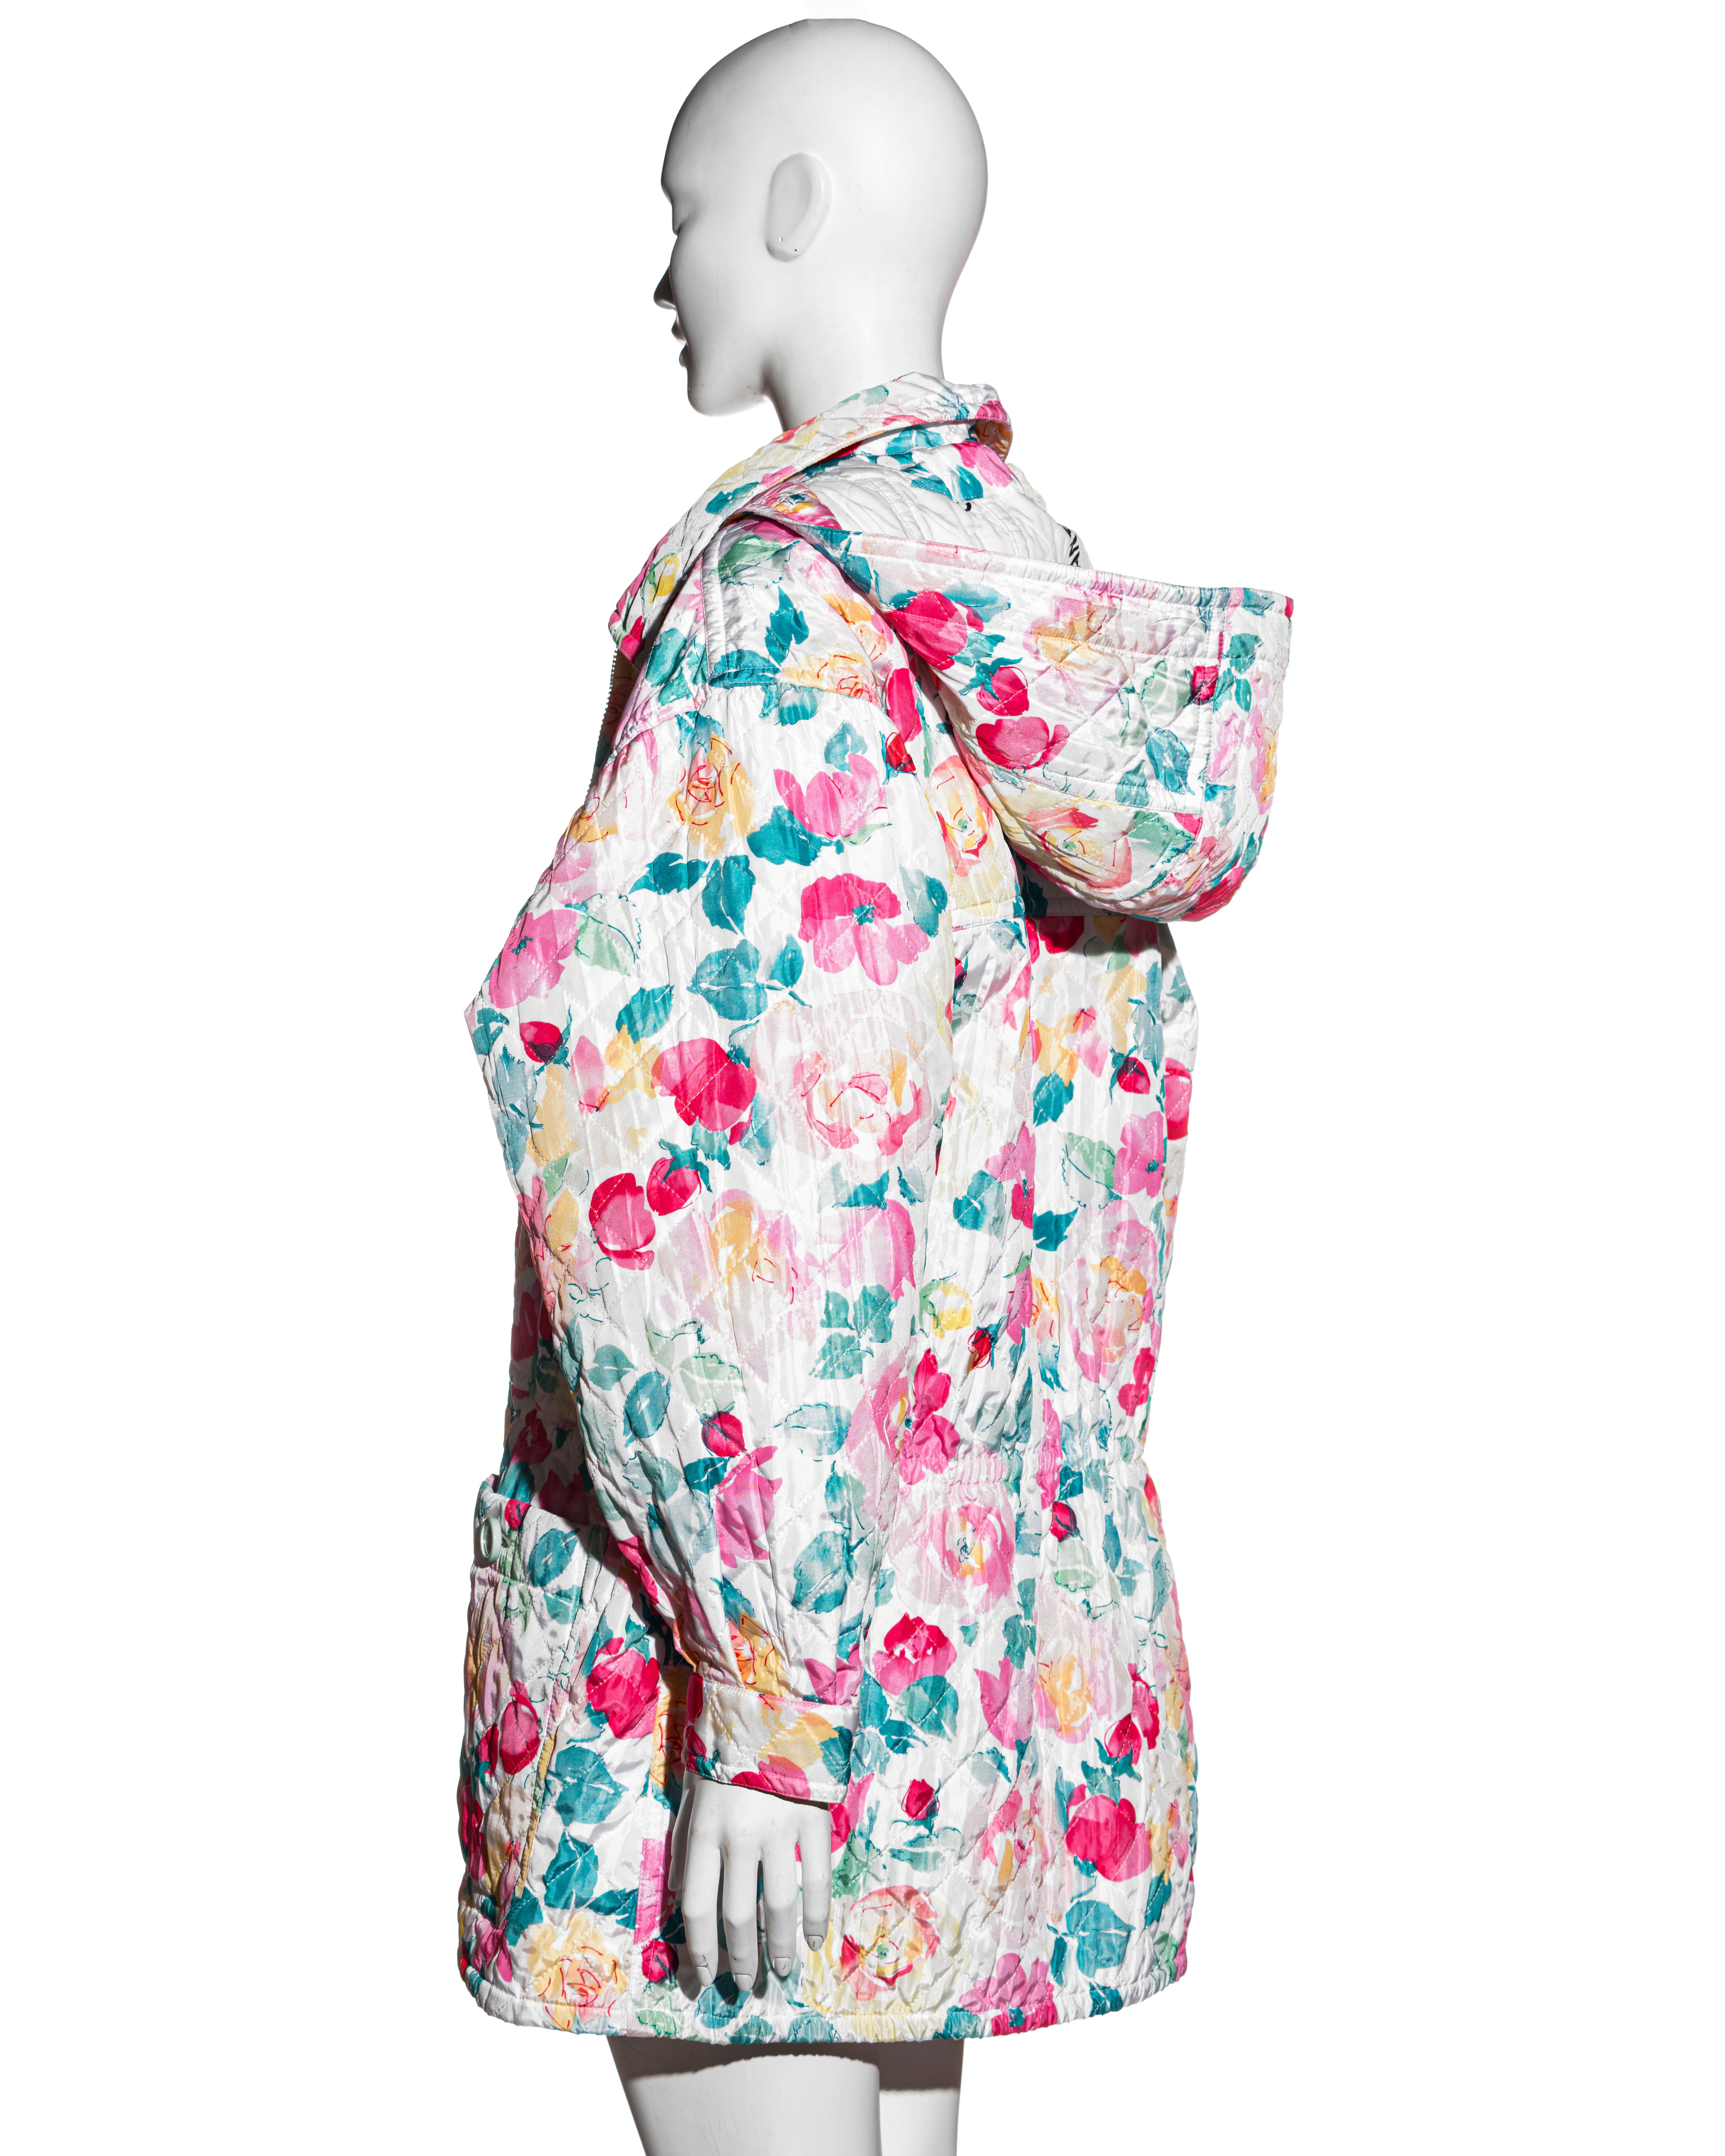 Chanel by Karl Lagerfeld pink rose print quilted playsuit and coat set, c 1994 For Sale 2